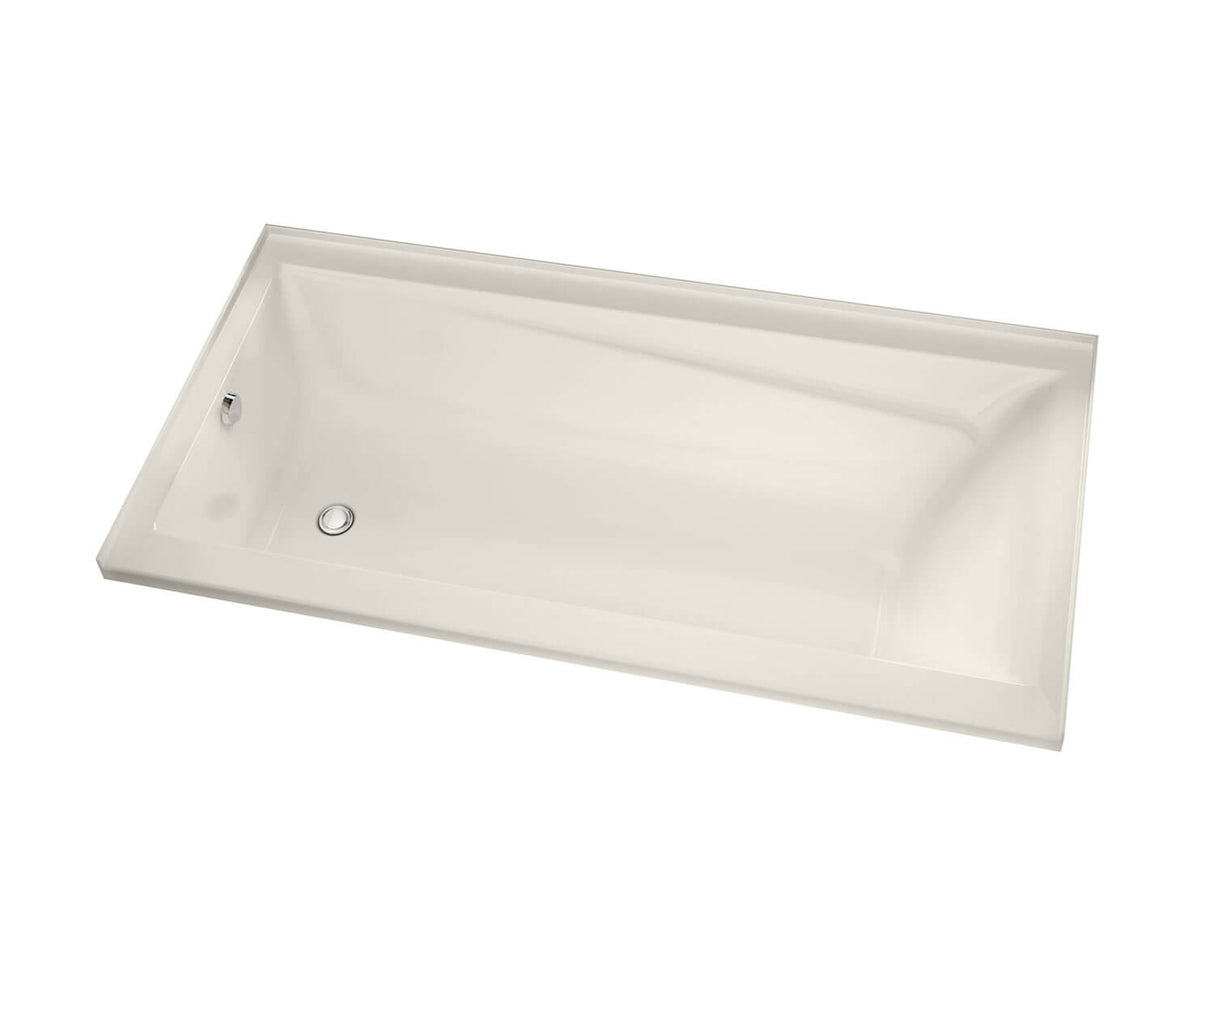 MAAX 105467-000-007-001 New Town 6032 IF Acrylic Alcove Left-Hand Drain Bathtub in Biscuit